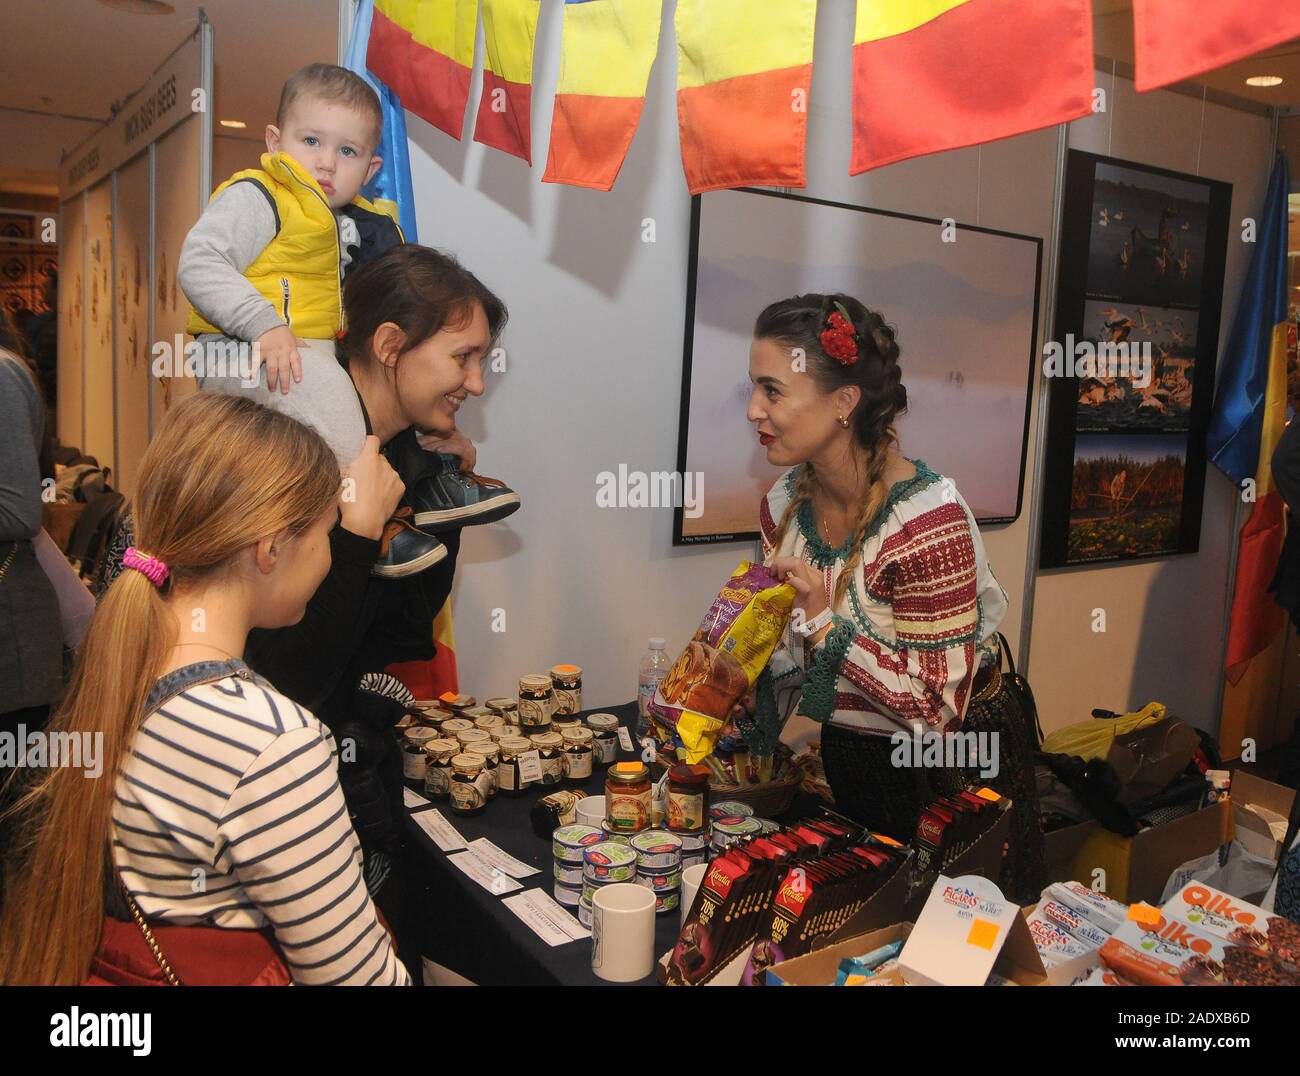 November 30, 2019, Kiev, Ukraine: A woman and a kid at the Embassy of Rumunia counter during the event at the NSC Olimpiysky..The 27th annual Charity Fair â€œIWCK Charity Bazaarâ€, a special event where representatives of 49 embassies of foreign countries organise an exhibition and sale of various national products. (Credit Image: © Alexey Ivanov/SOPA Images via ZUMA Wire) Stock Photo